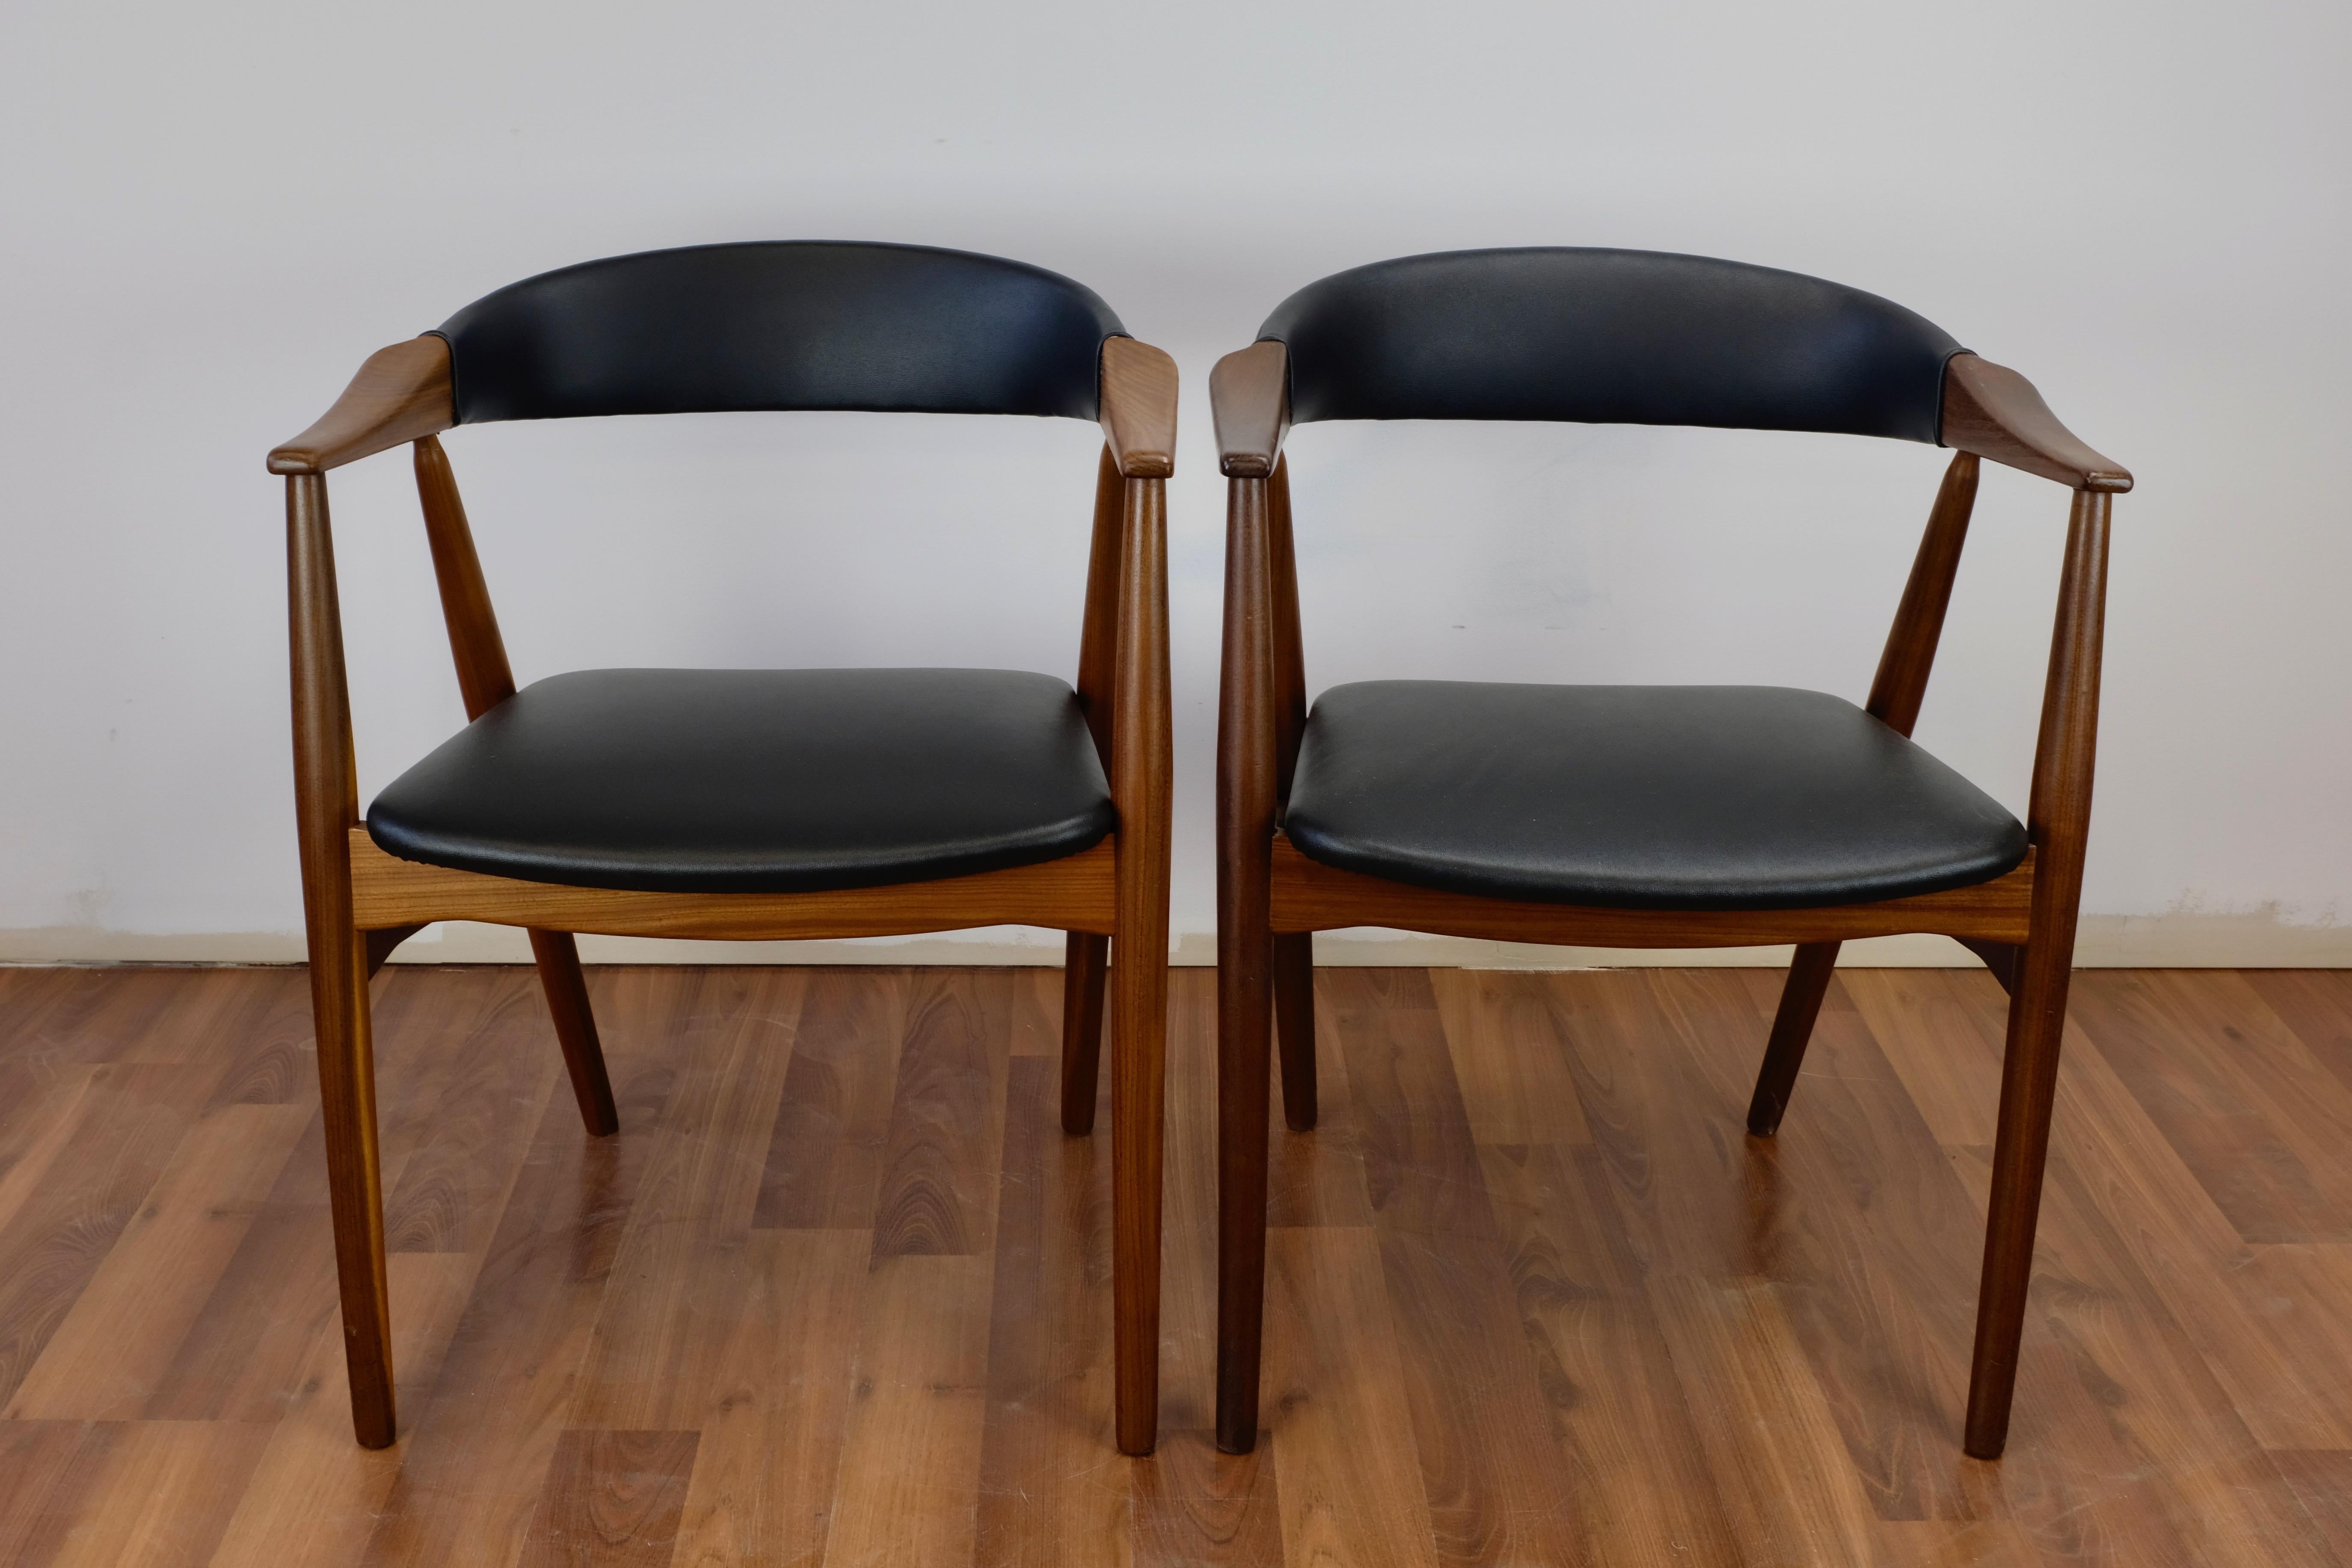 Set of two teak armchairs made in Denmark by Farstrup Stolefabrik with upholstered seats and backs.

The chairs have been fully refinished and reupholstered with black leatherette. One of the chairs has a metal bracket where the arm meets the